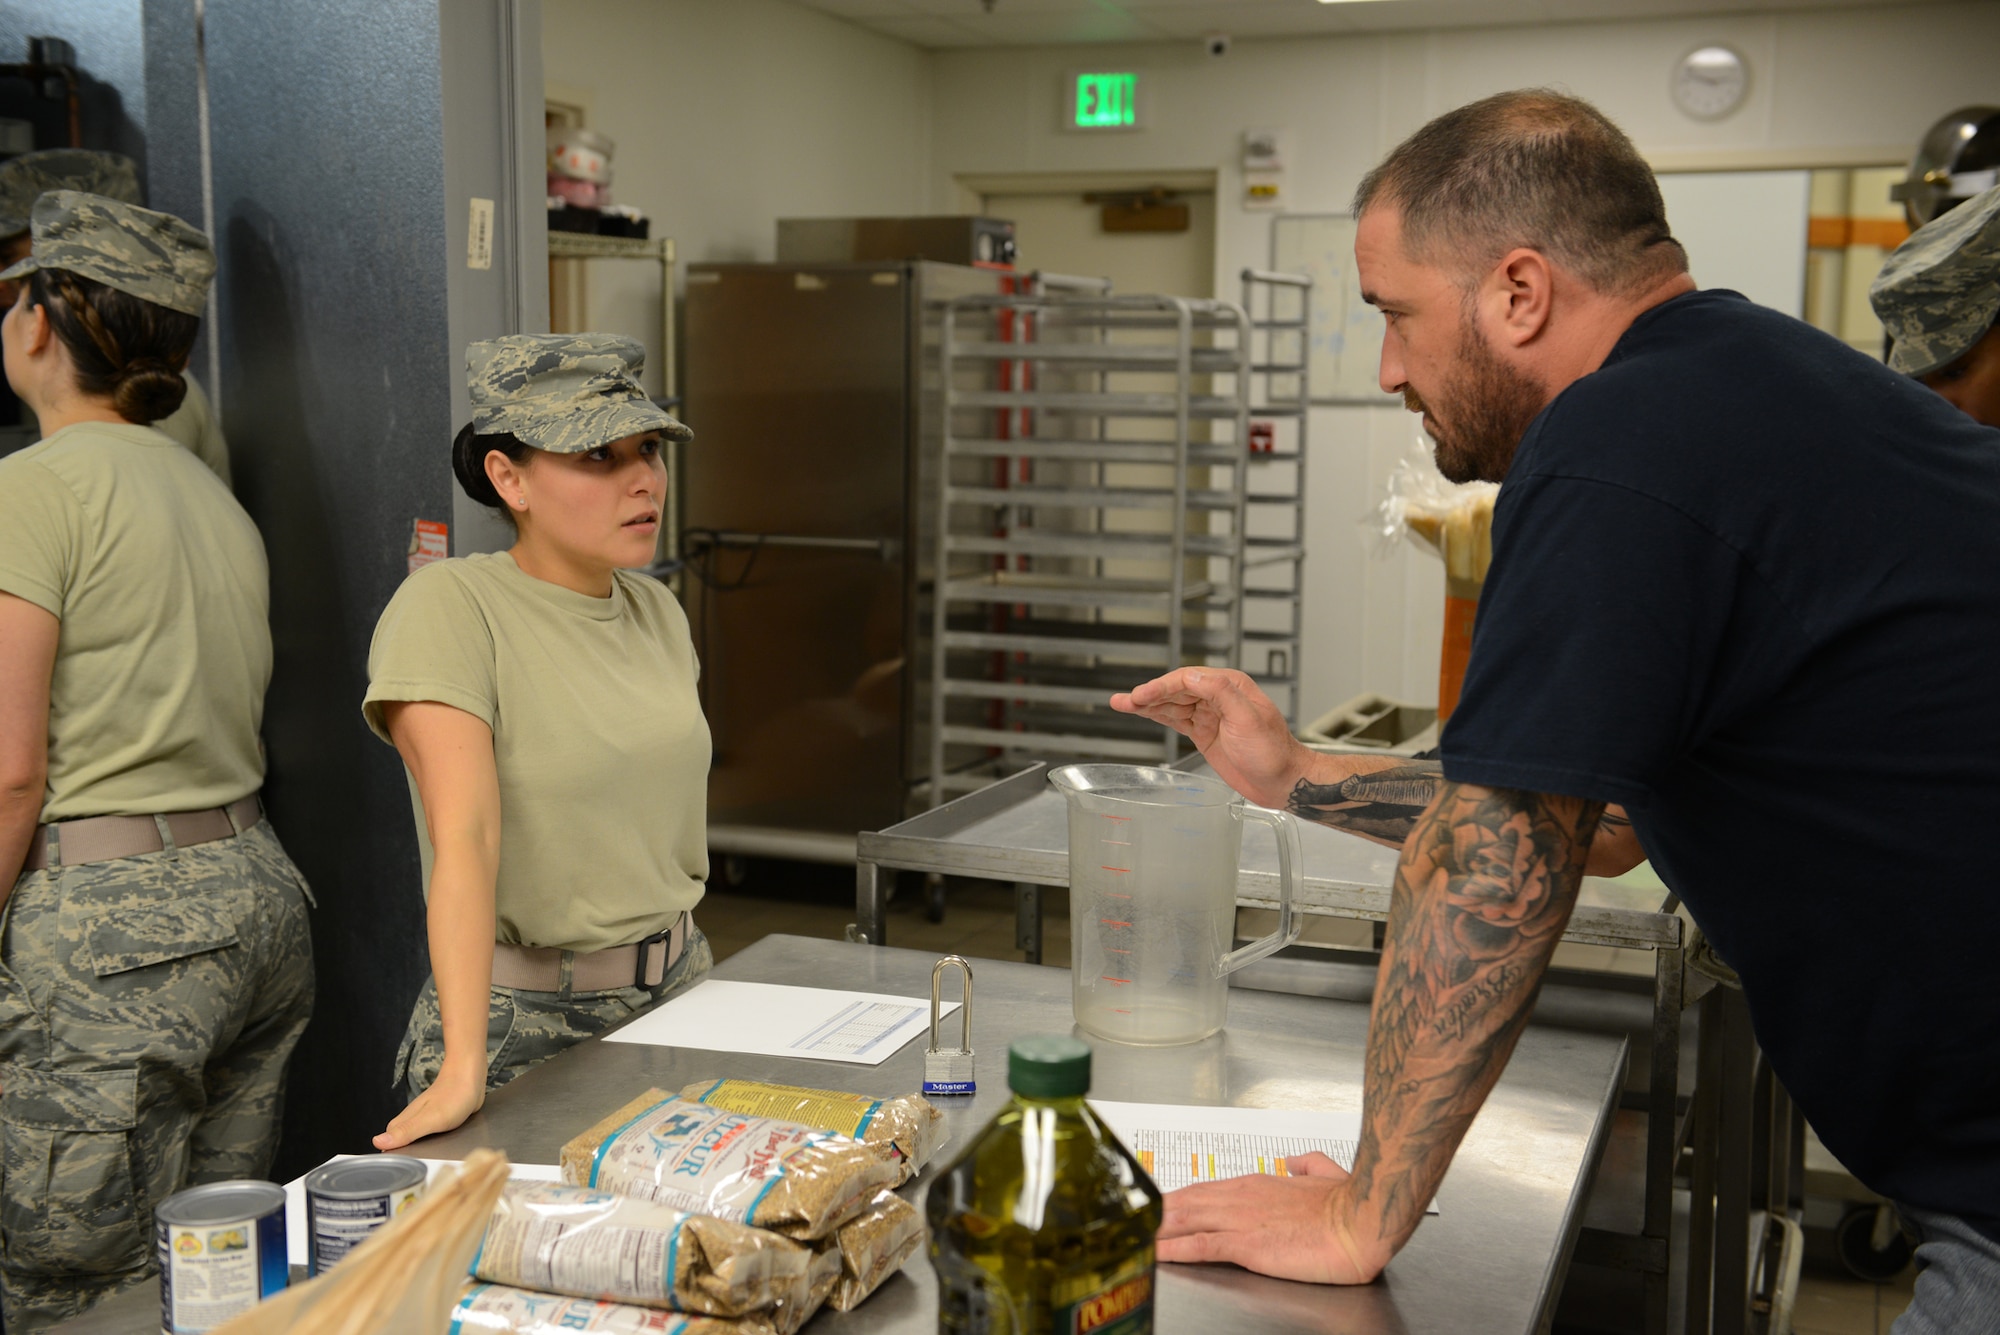 Chef Darryl Moiles explains meal preparation instructions to Senior Airman Secilia Peraza, 90th Force Support Squadron missile field chef, Sept. 6, 2017, at Malmstrom Air Force Base, Mont. Missile field chefs from Malmstrom, Minot AFB, N.D, and F.E. Warren AFB, Wyo., prepared food for the base under the guidance and mentoring from Chefs Robert Irvine and Moiles. (U.S. Air Force photo/Staff Sgt. Delia Martinez)